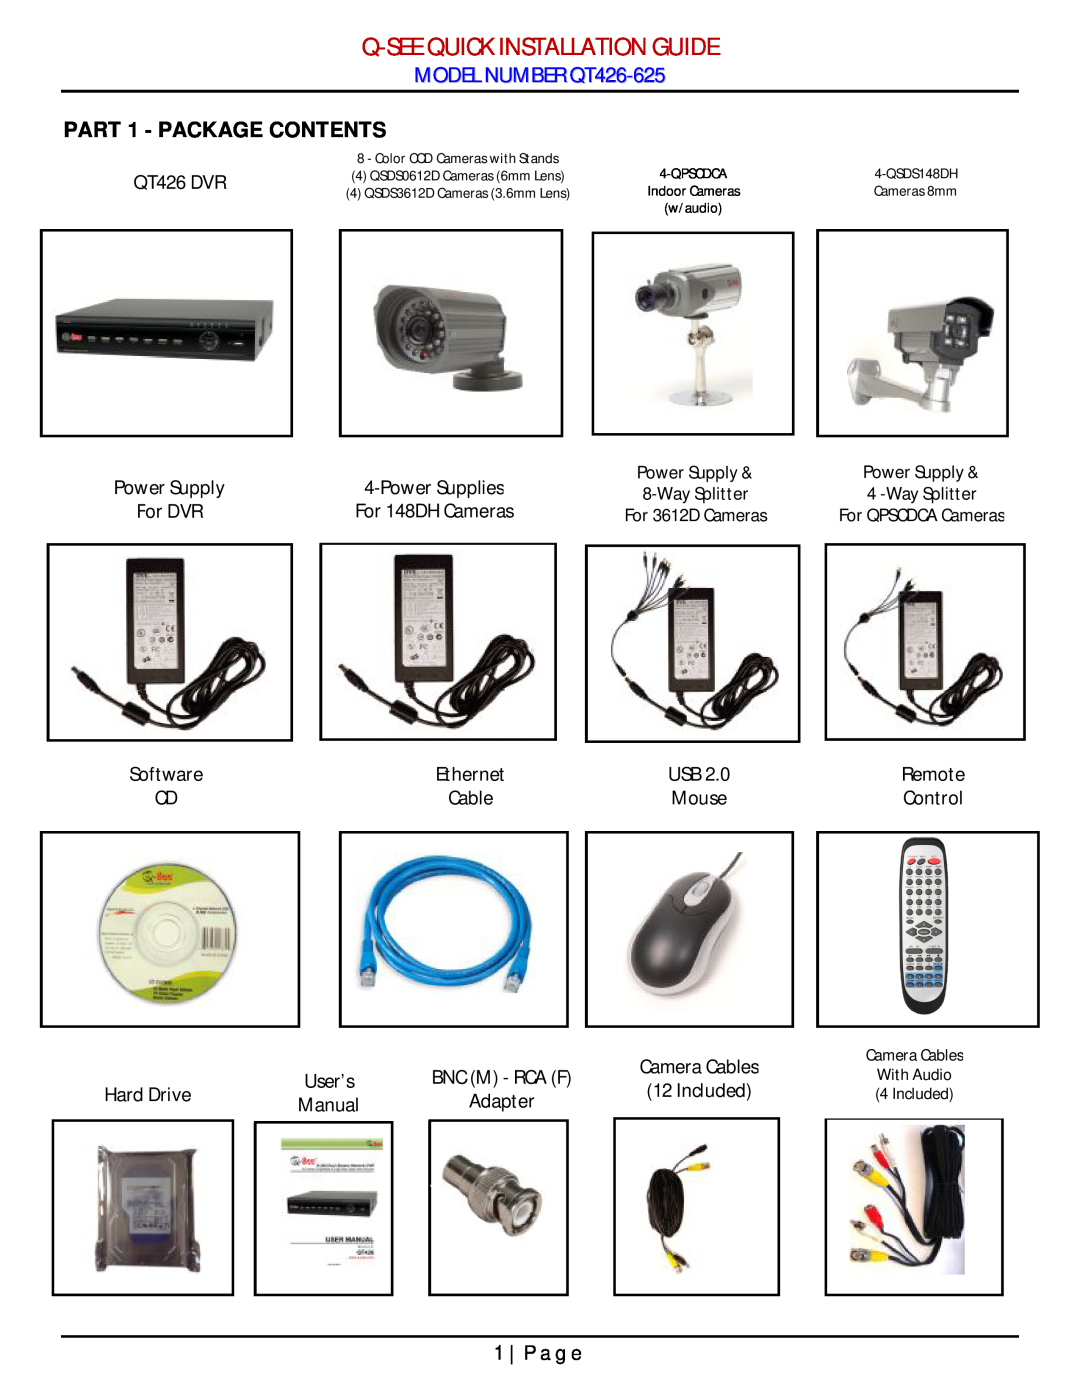 Q-See Q-Seequick Installation Guide, MODEL NUMBER QT426-625, PART 1 - PACKAGE CONTENTS, P a g e, QT426 DVR, For DVR 